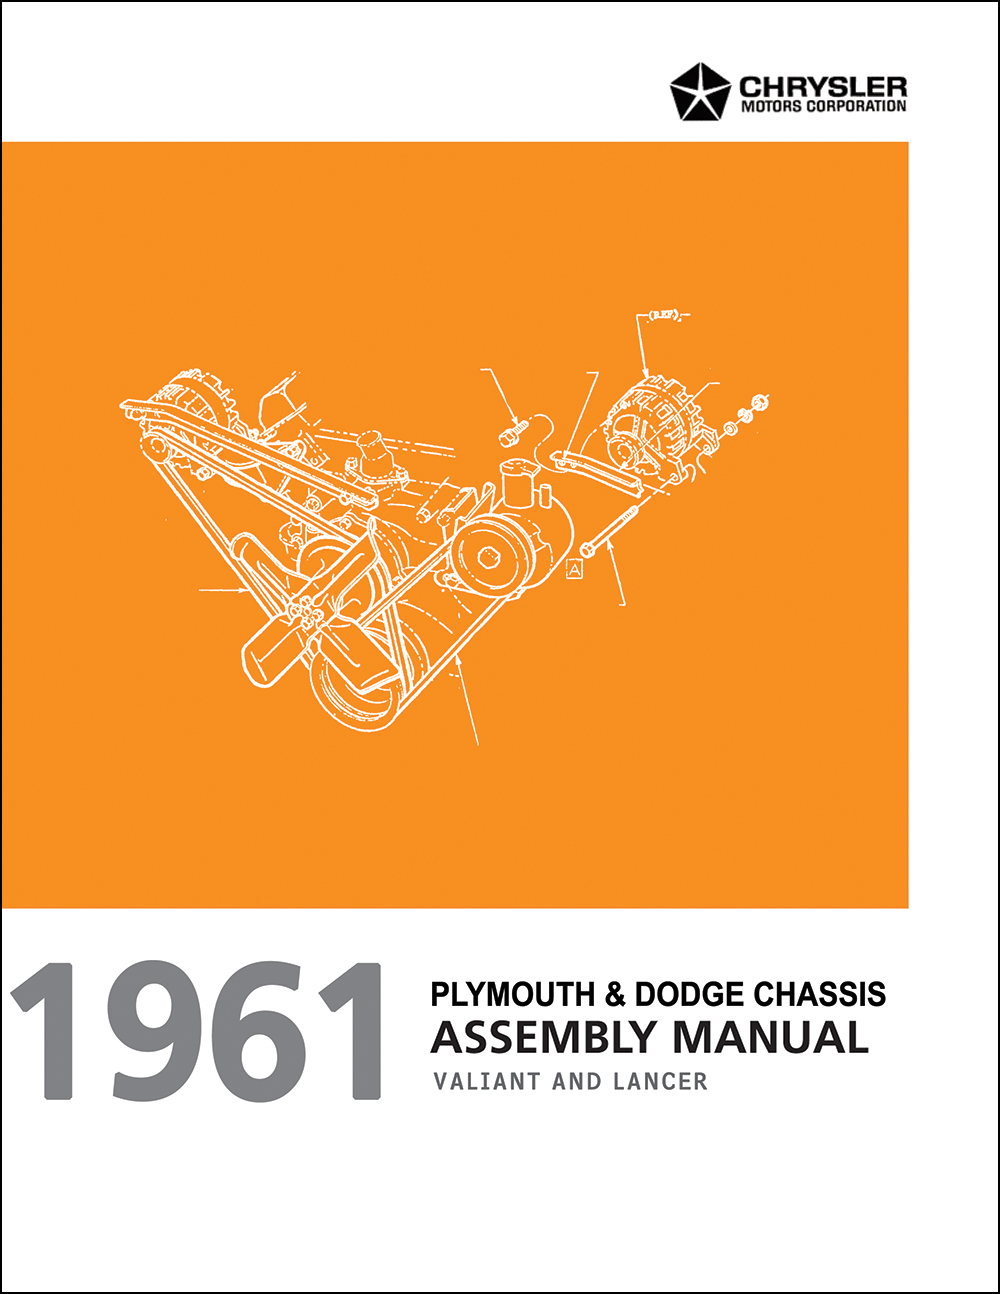 1961 Lancer and Valiant Chassis Assembly Manual Reprint Dodge Plymouth